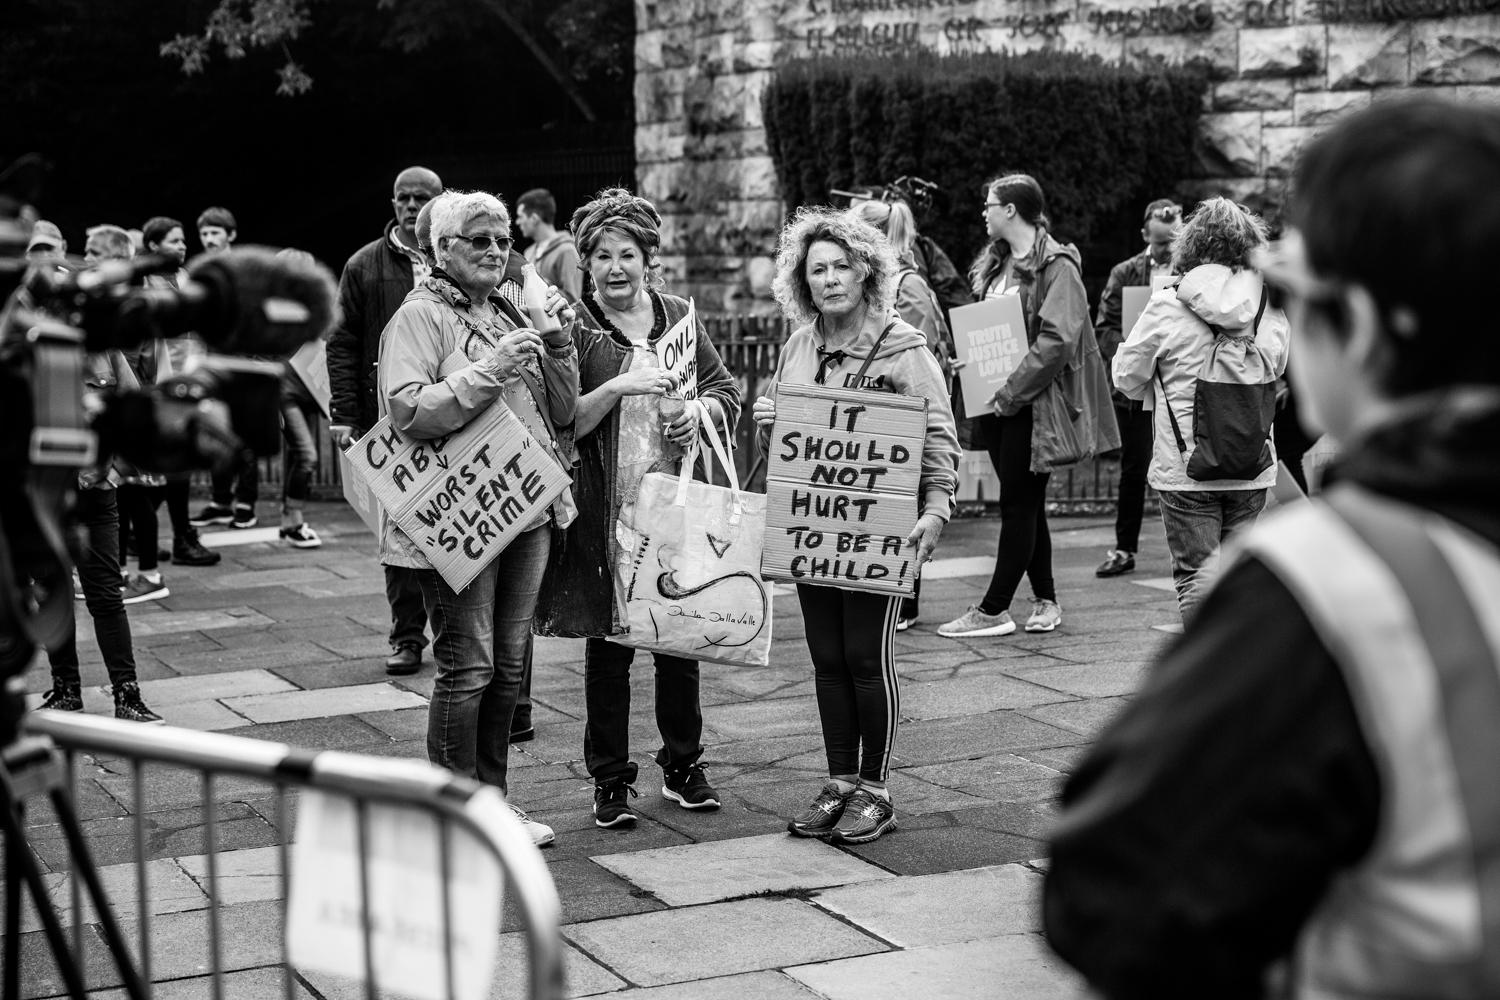 26th/08/2018:Citizens arrive at the Stand for Truth event at the Garden of remembrance in Dublin...